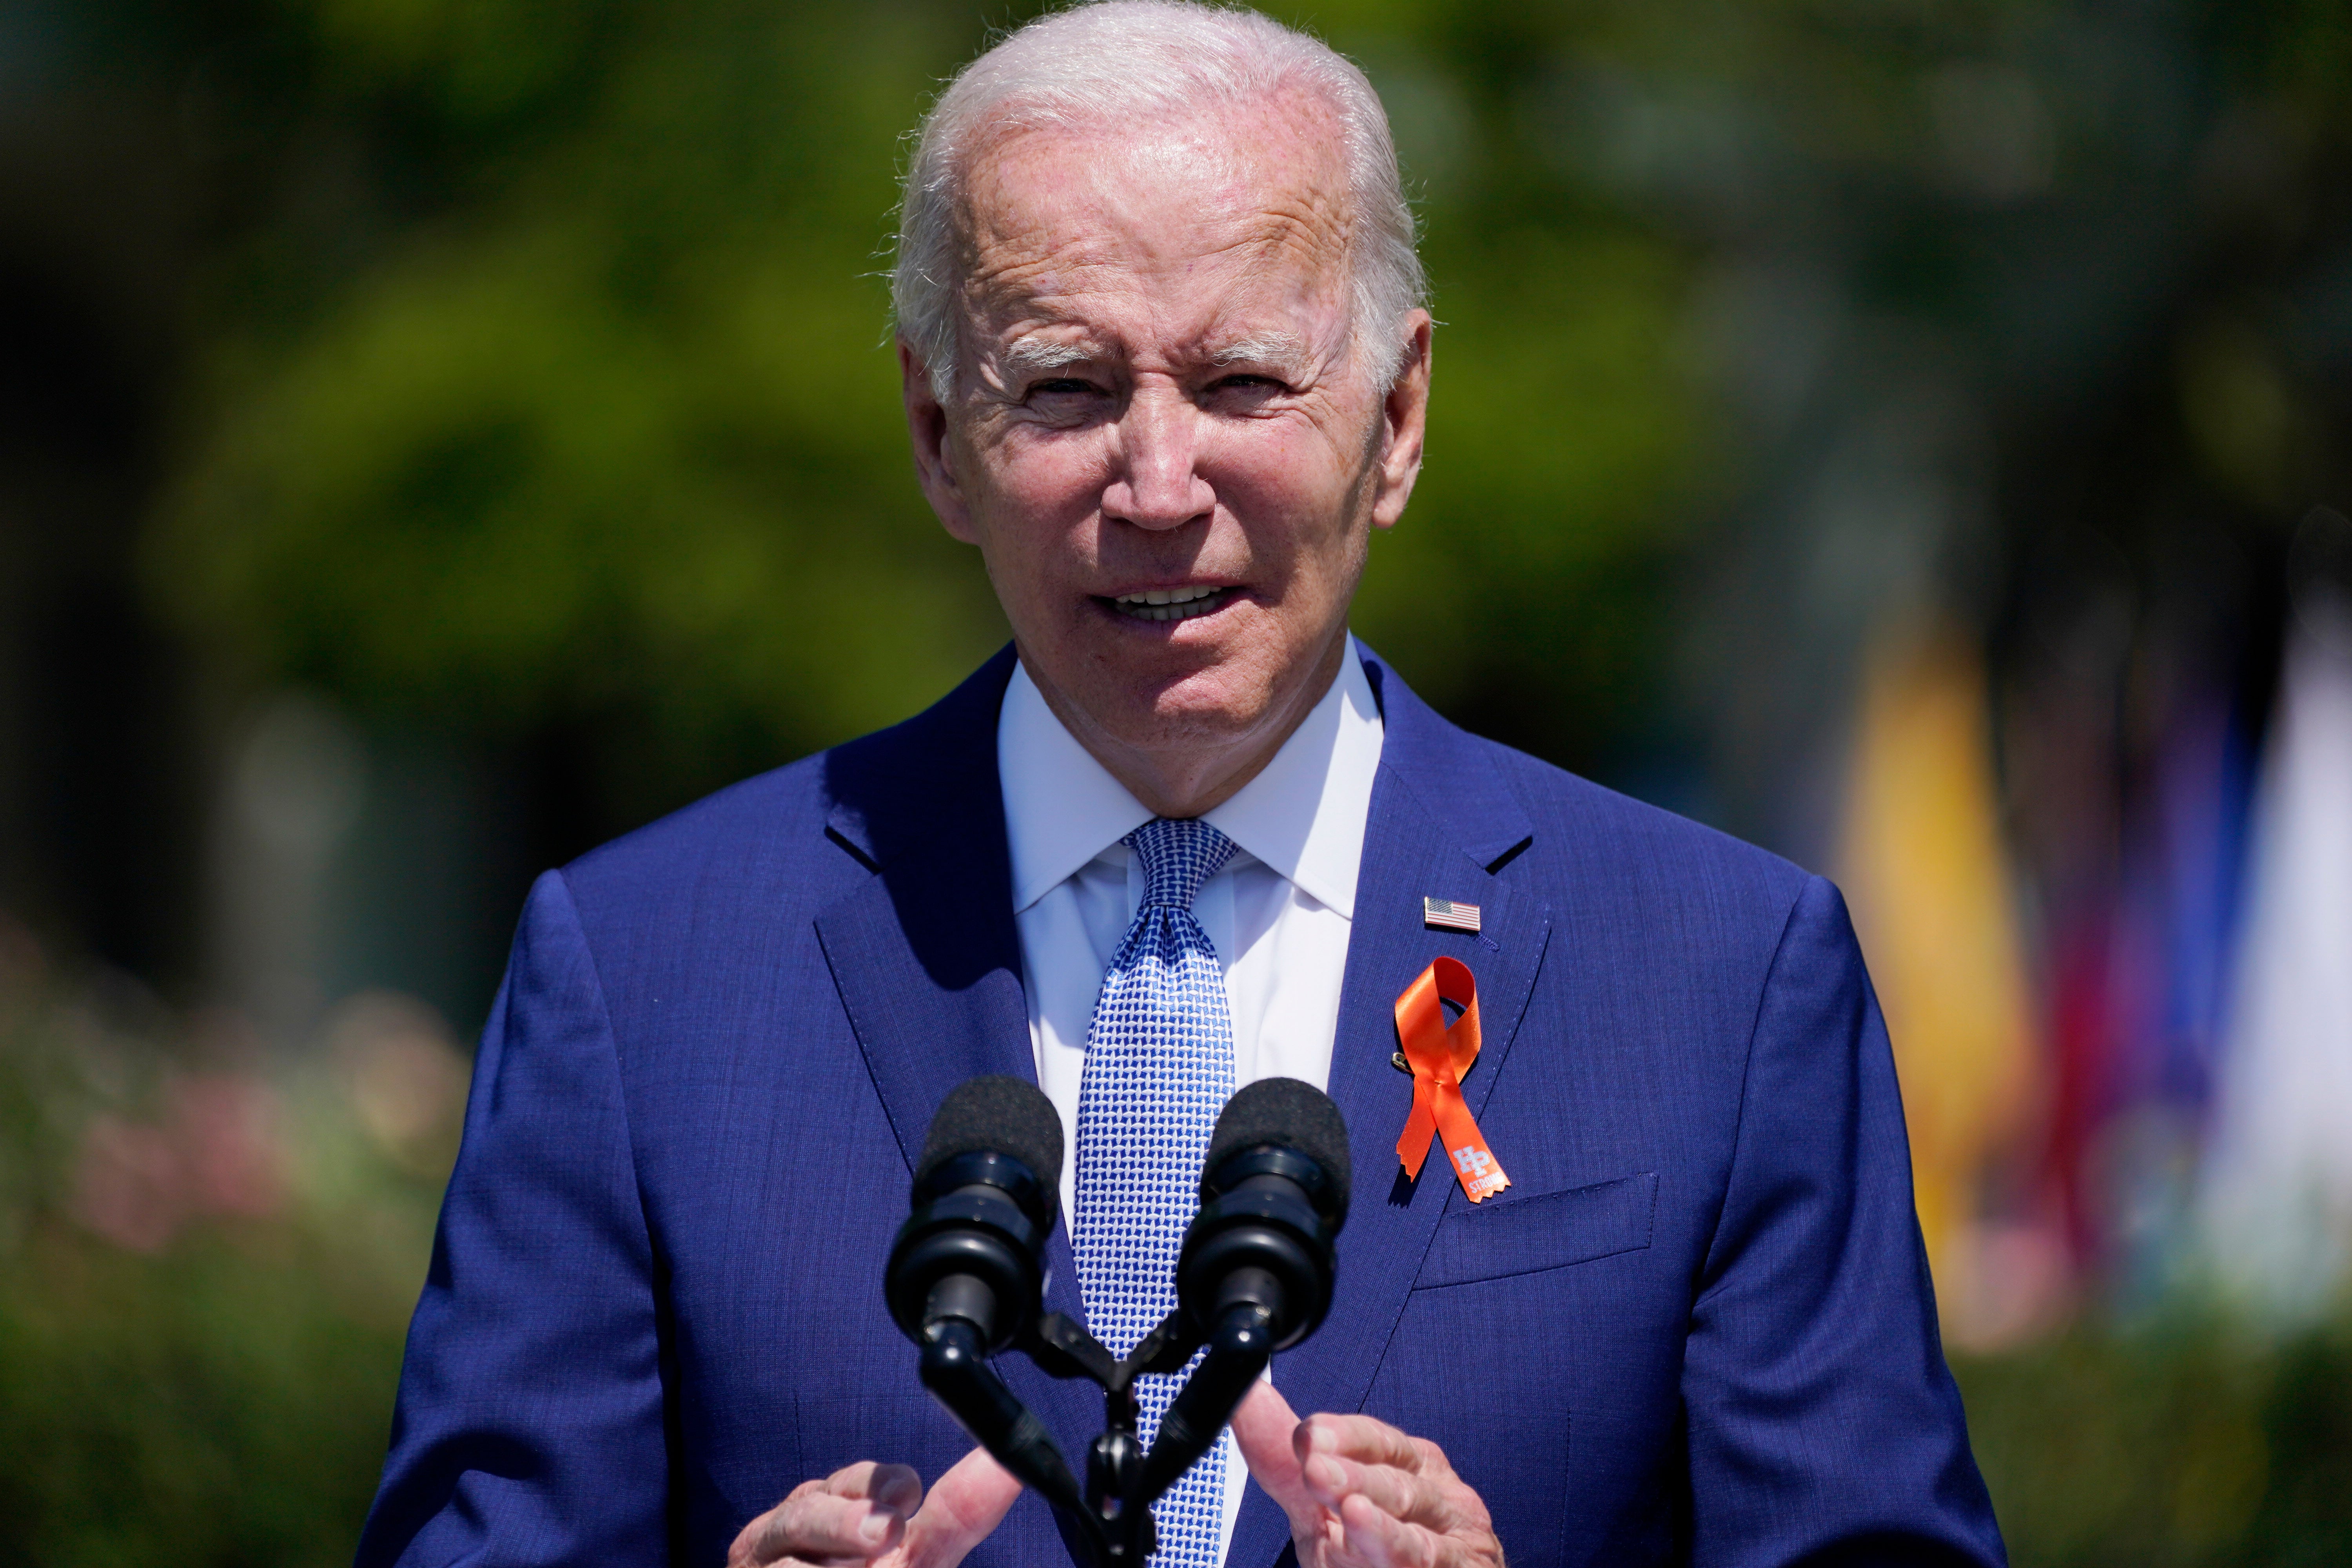 Biden speaks after signing an executive order this week